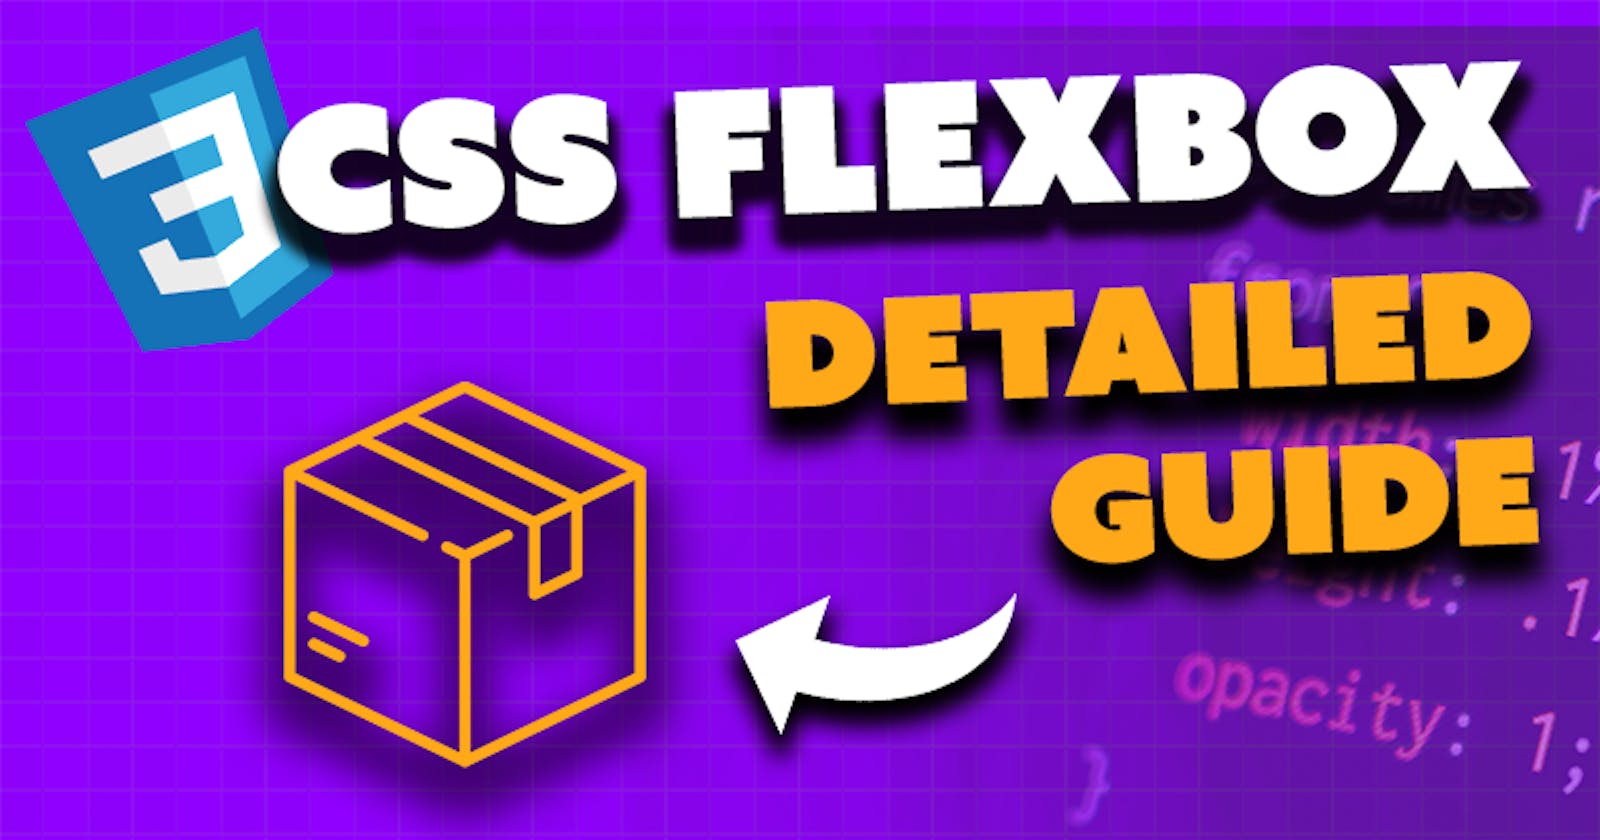 CSS Flexbox Course for Complete Beginners